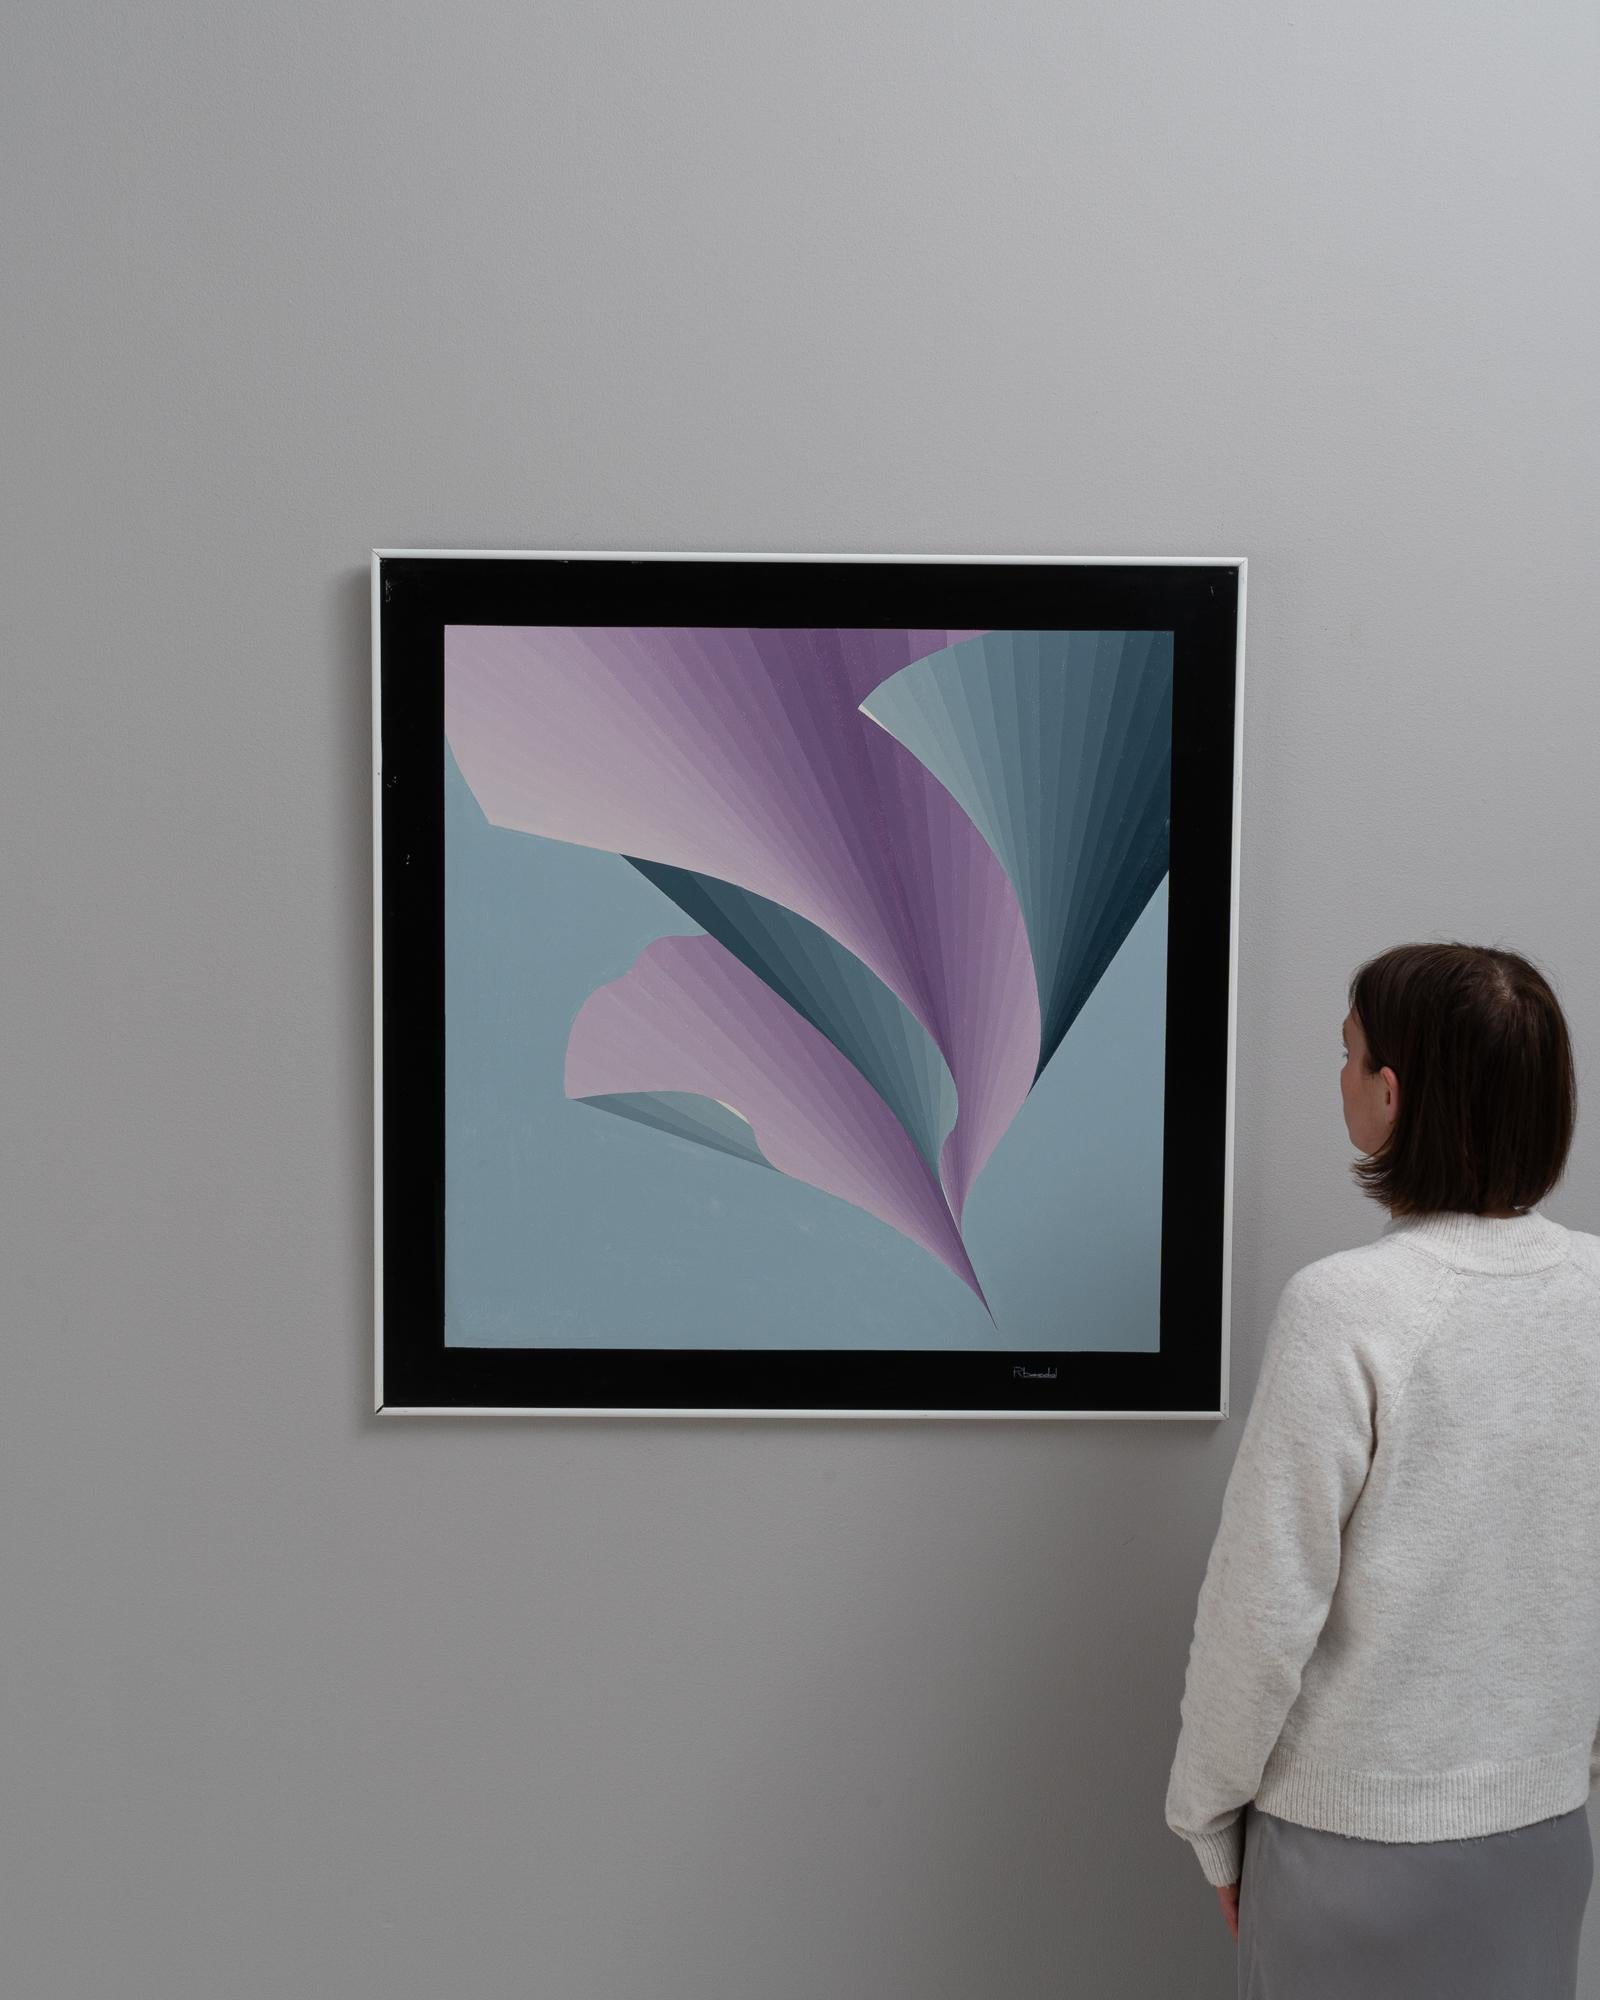 Step into a world of abstract elegance with this 20th-century Belgian artwork by Rene Berdal, gracefully framed in a sleek metal border. This stunning piece features a minimalist yet bold design, with large, sweeping forms in shades of lilac and